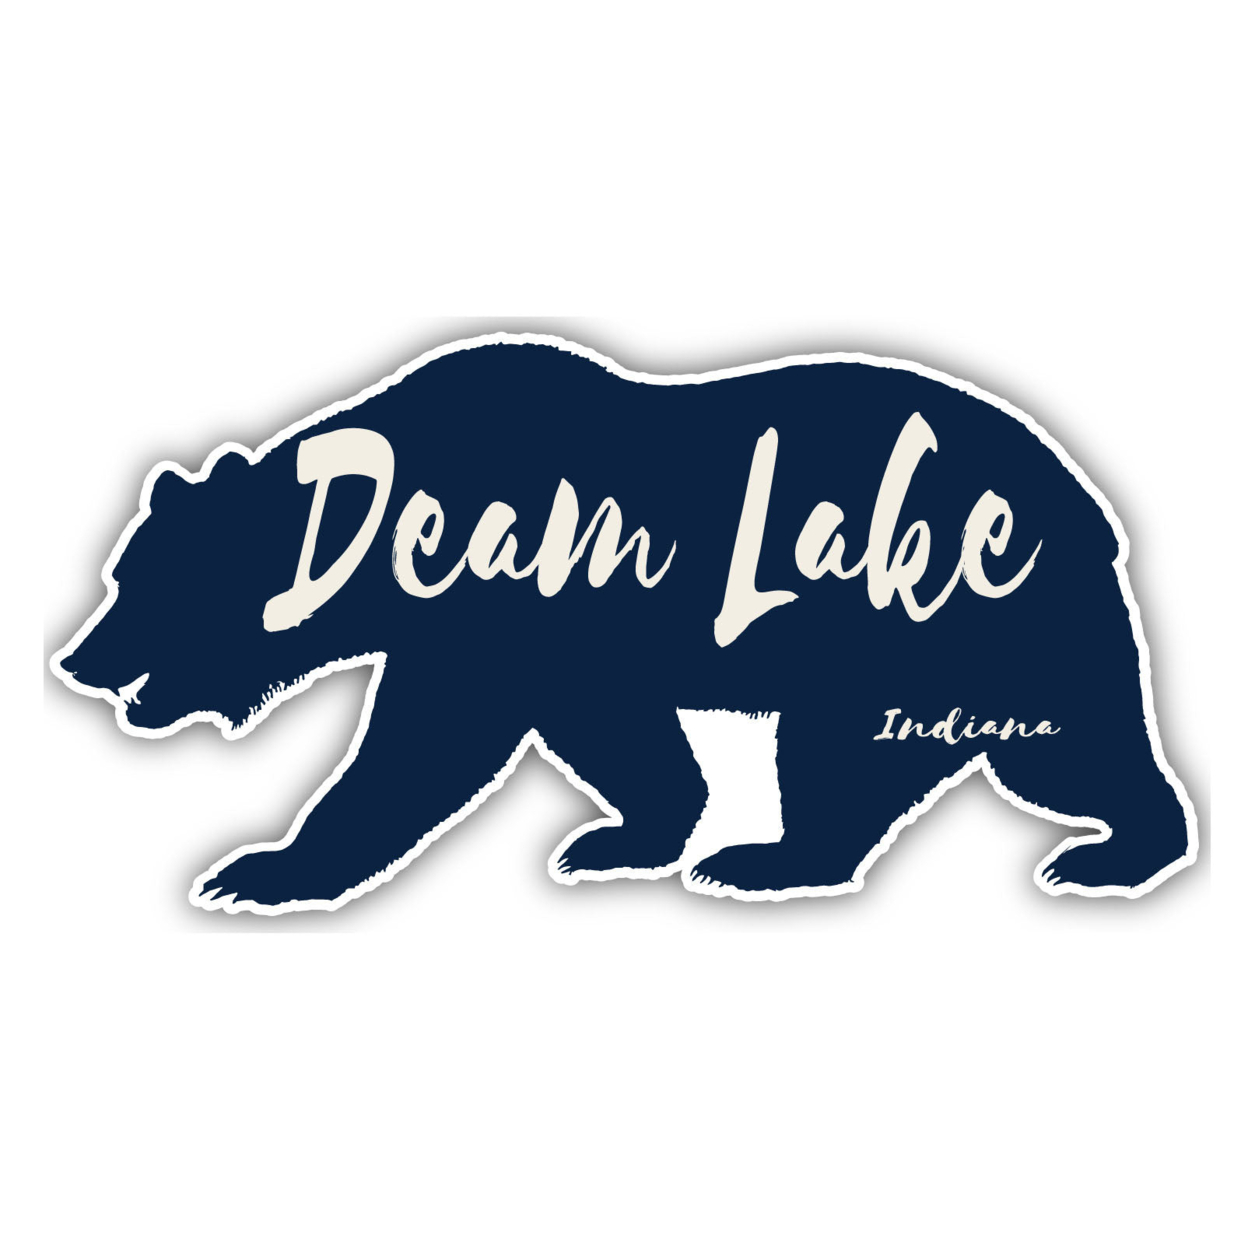 Deam Lake Indiana Souvenir Decorative Stickers (Choose Theme And Size) - 4-Pack, 6-Inch, Bear